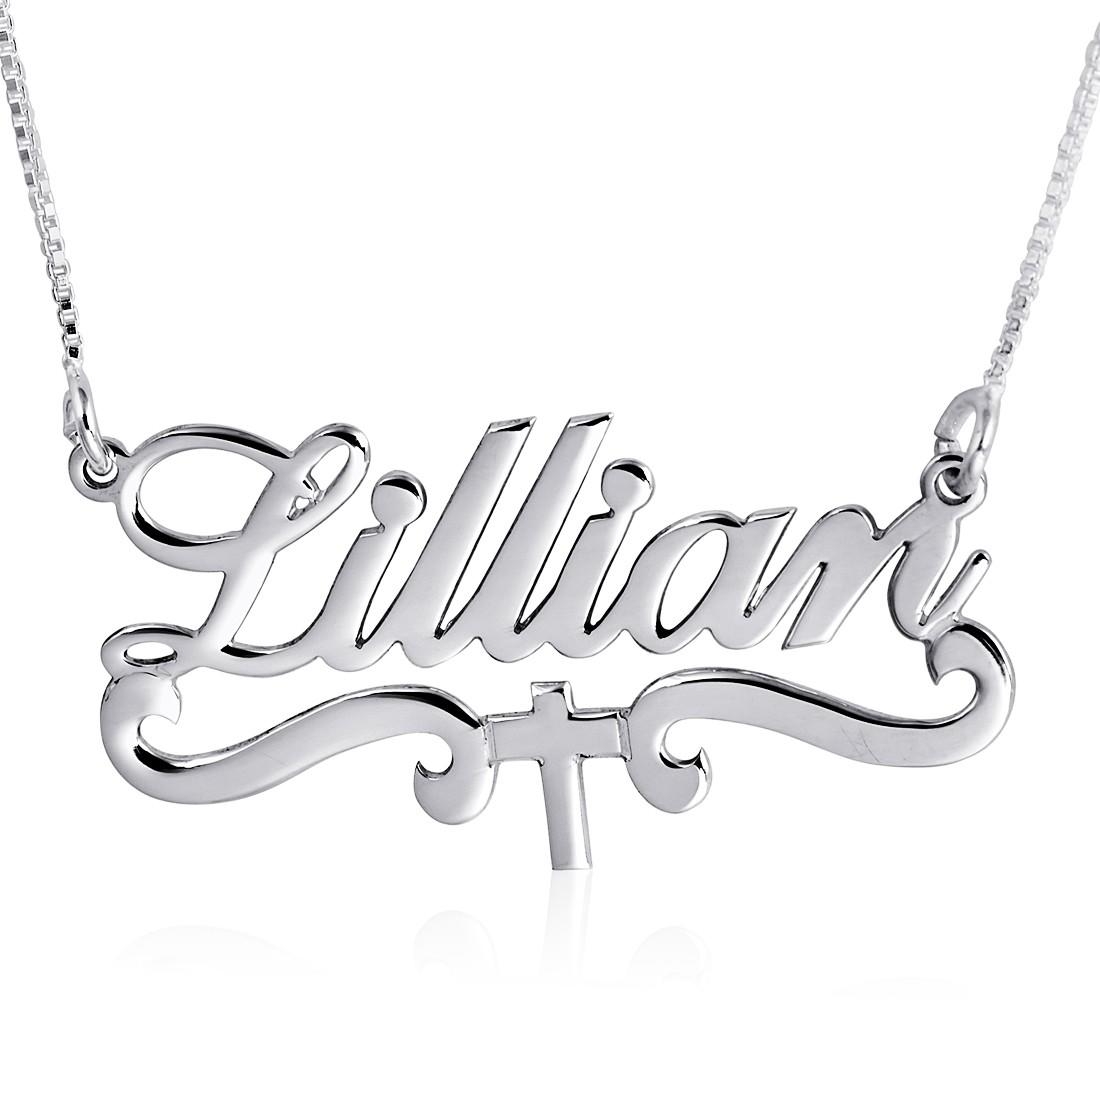 Sterling Silver Script Personalized Name Necklace with Cross and Embellishments - 1